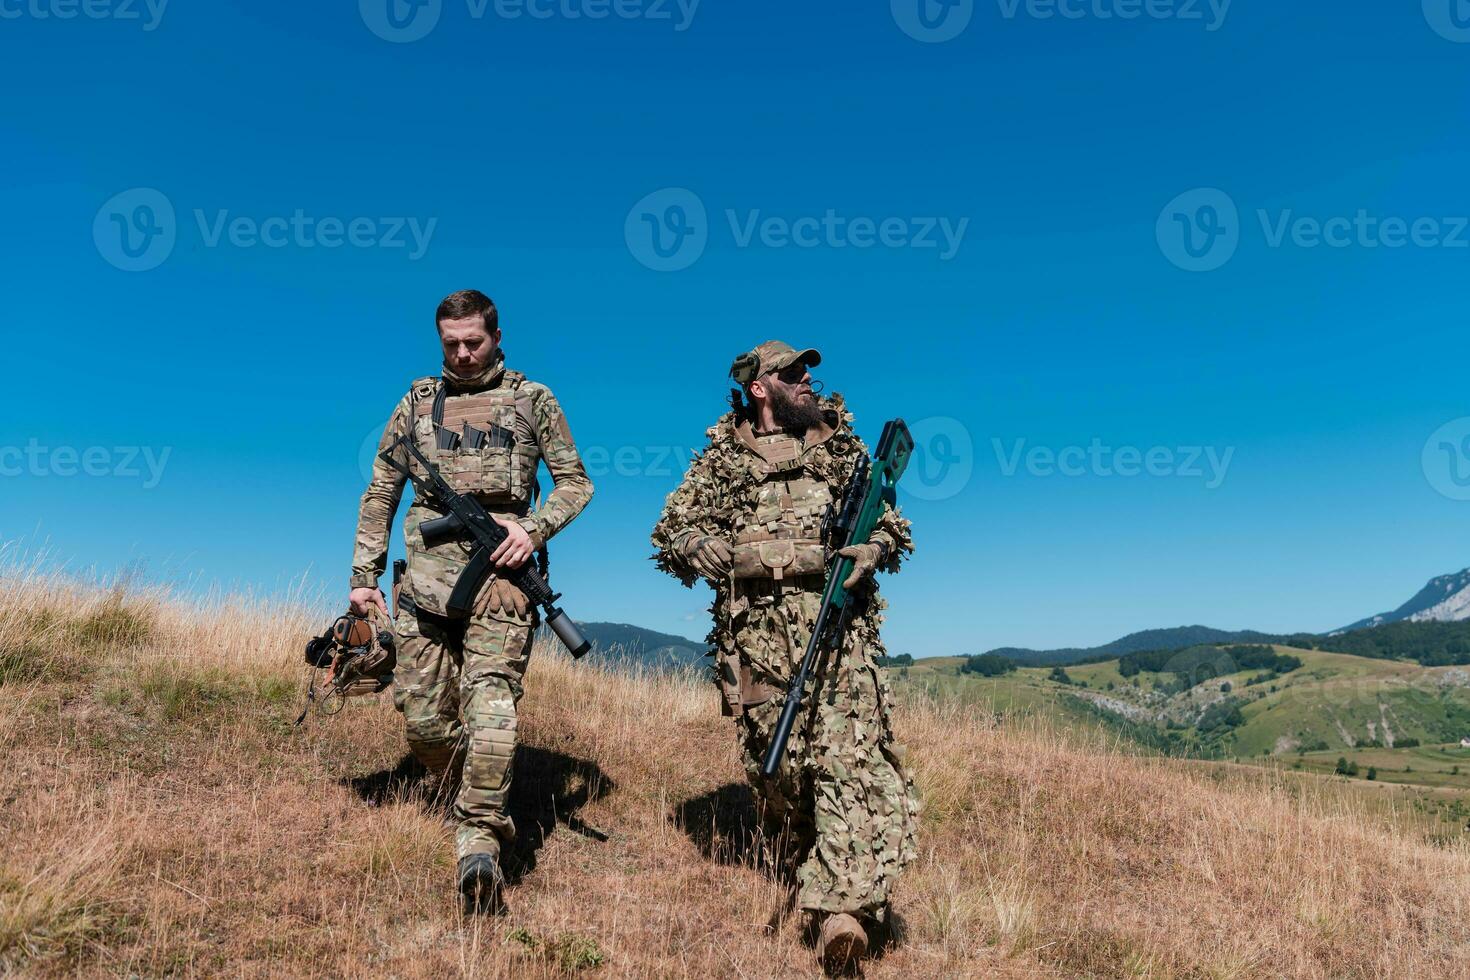 A sniper team squad of soldiers is going undercover. Sniper assistant and team leader walking and aiming in nature with yellow grass and blue sky. Tactical camouflage uniform. photo